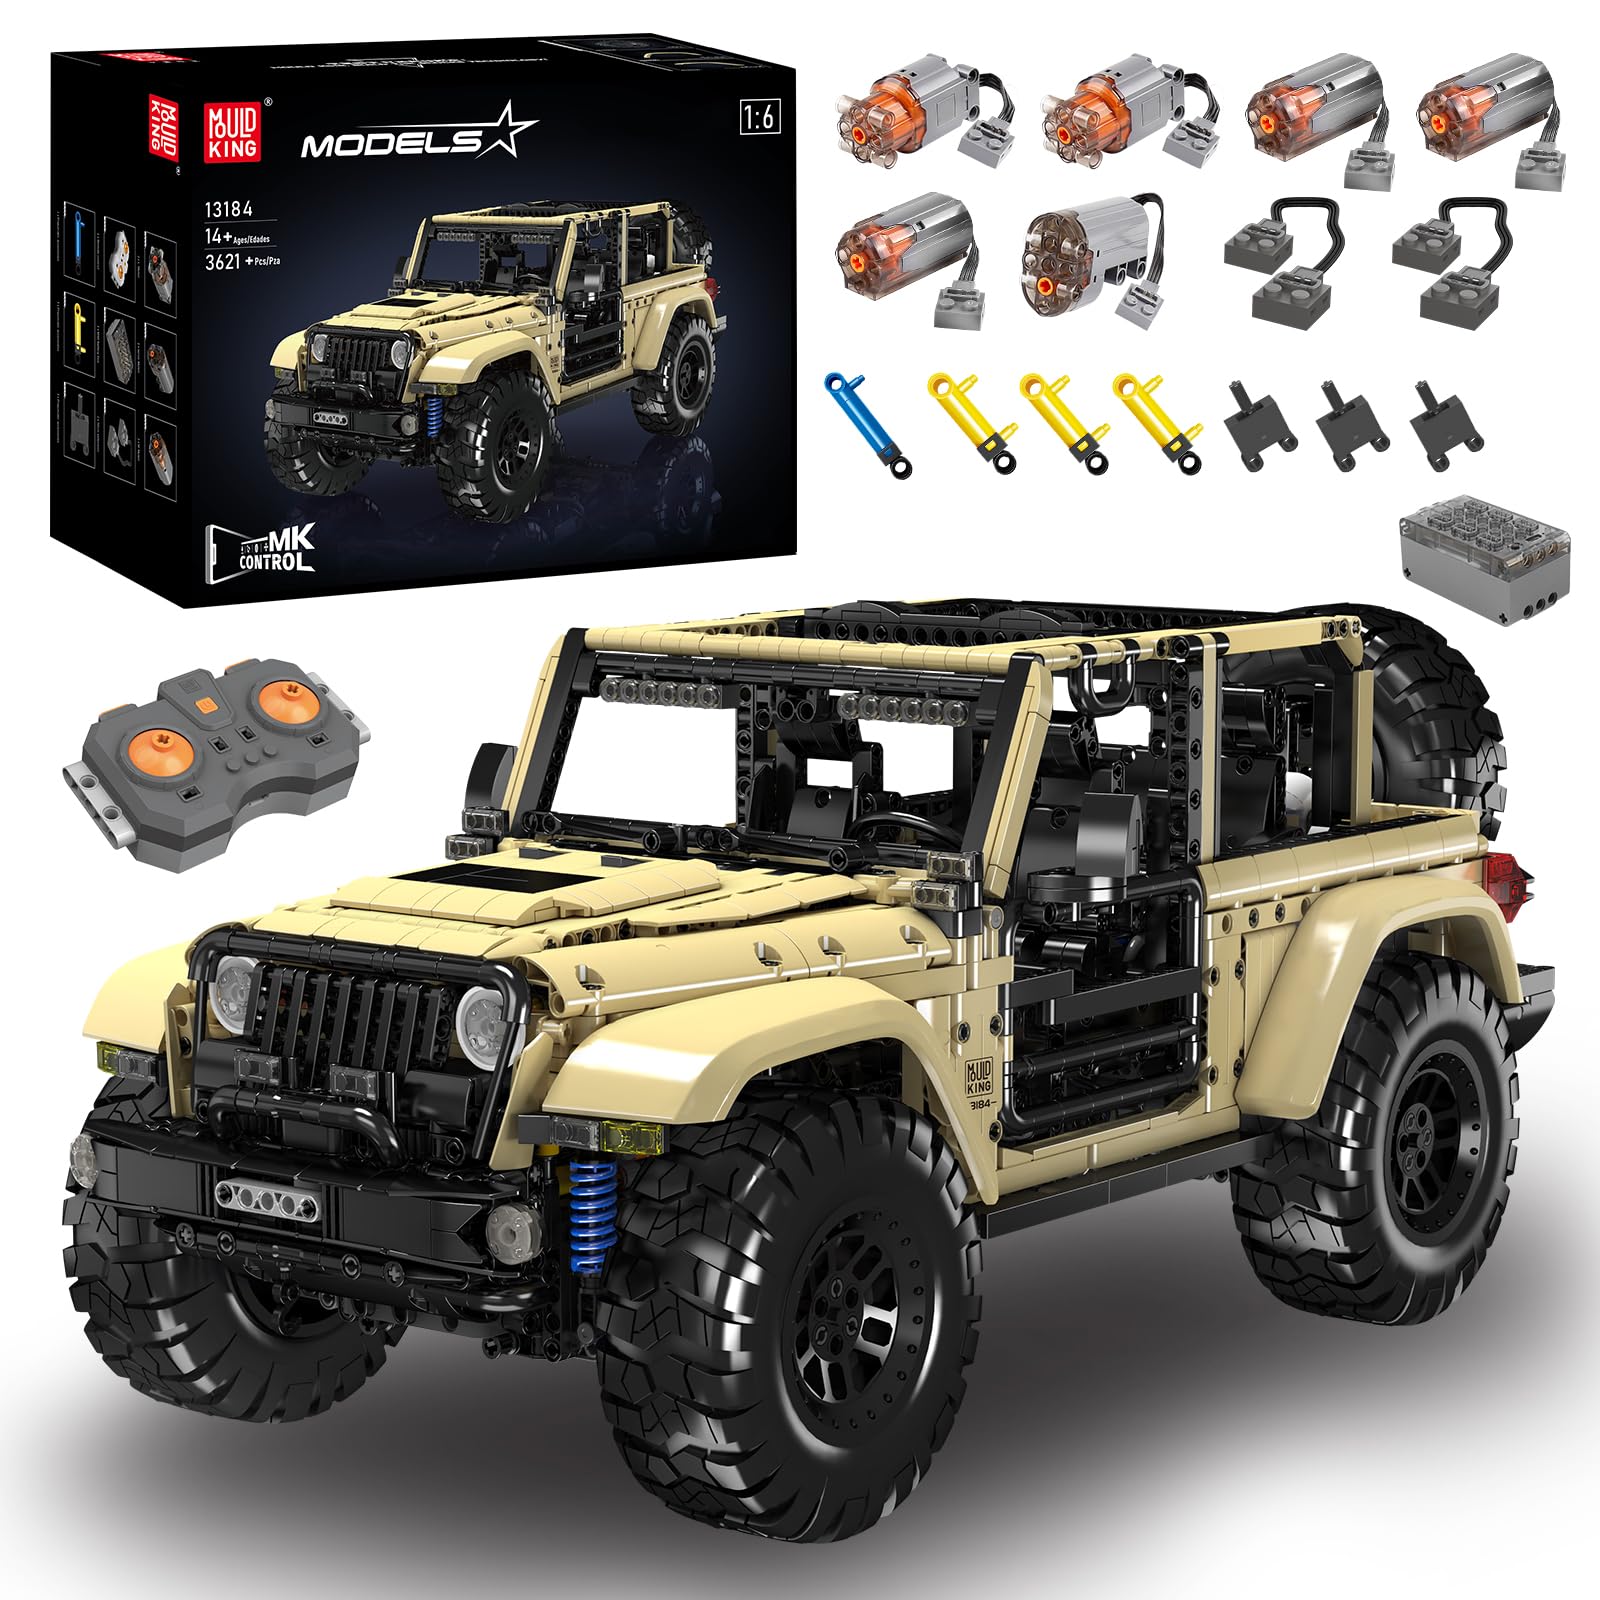 Mould King 13184 1:6 Large Scale Fully RC Wrangler Adventure SUV Car Building Block Toy